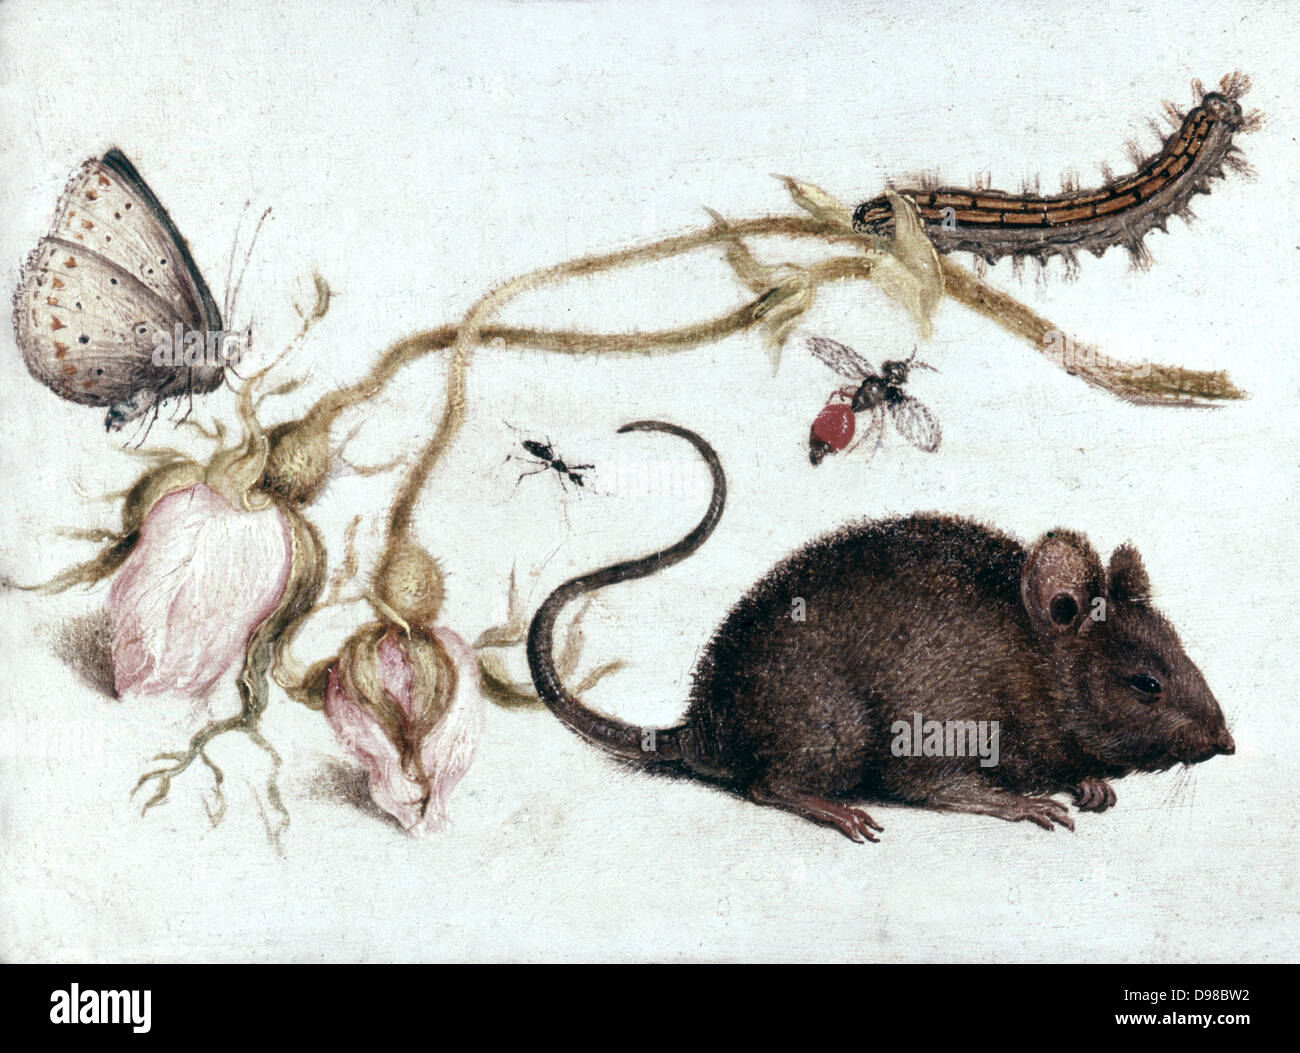 Mouse, Fowers and Insects': Butterfly and caterpillar on a sprig of faded pink moss rose buds. Mouse in lower right quarter. Joris Hoefnagel , also known as George Hoefnagel (1542-1601) Flemish painter and engraver. Watercolour Stock Photo